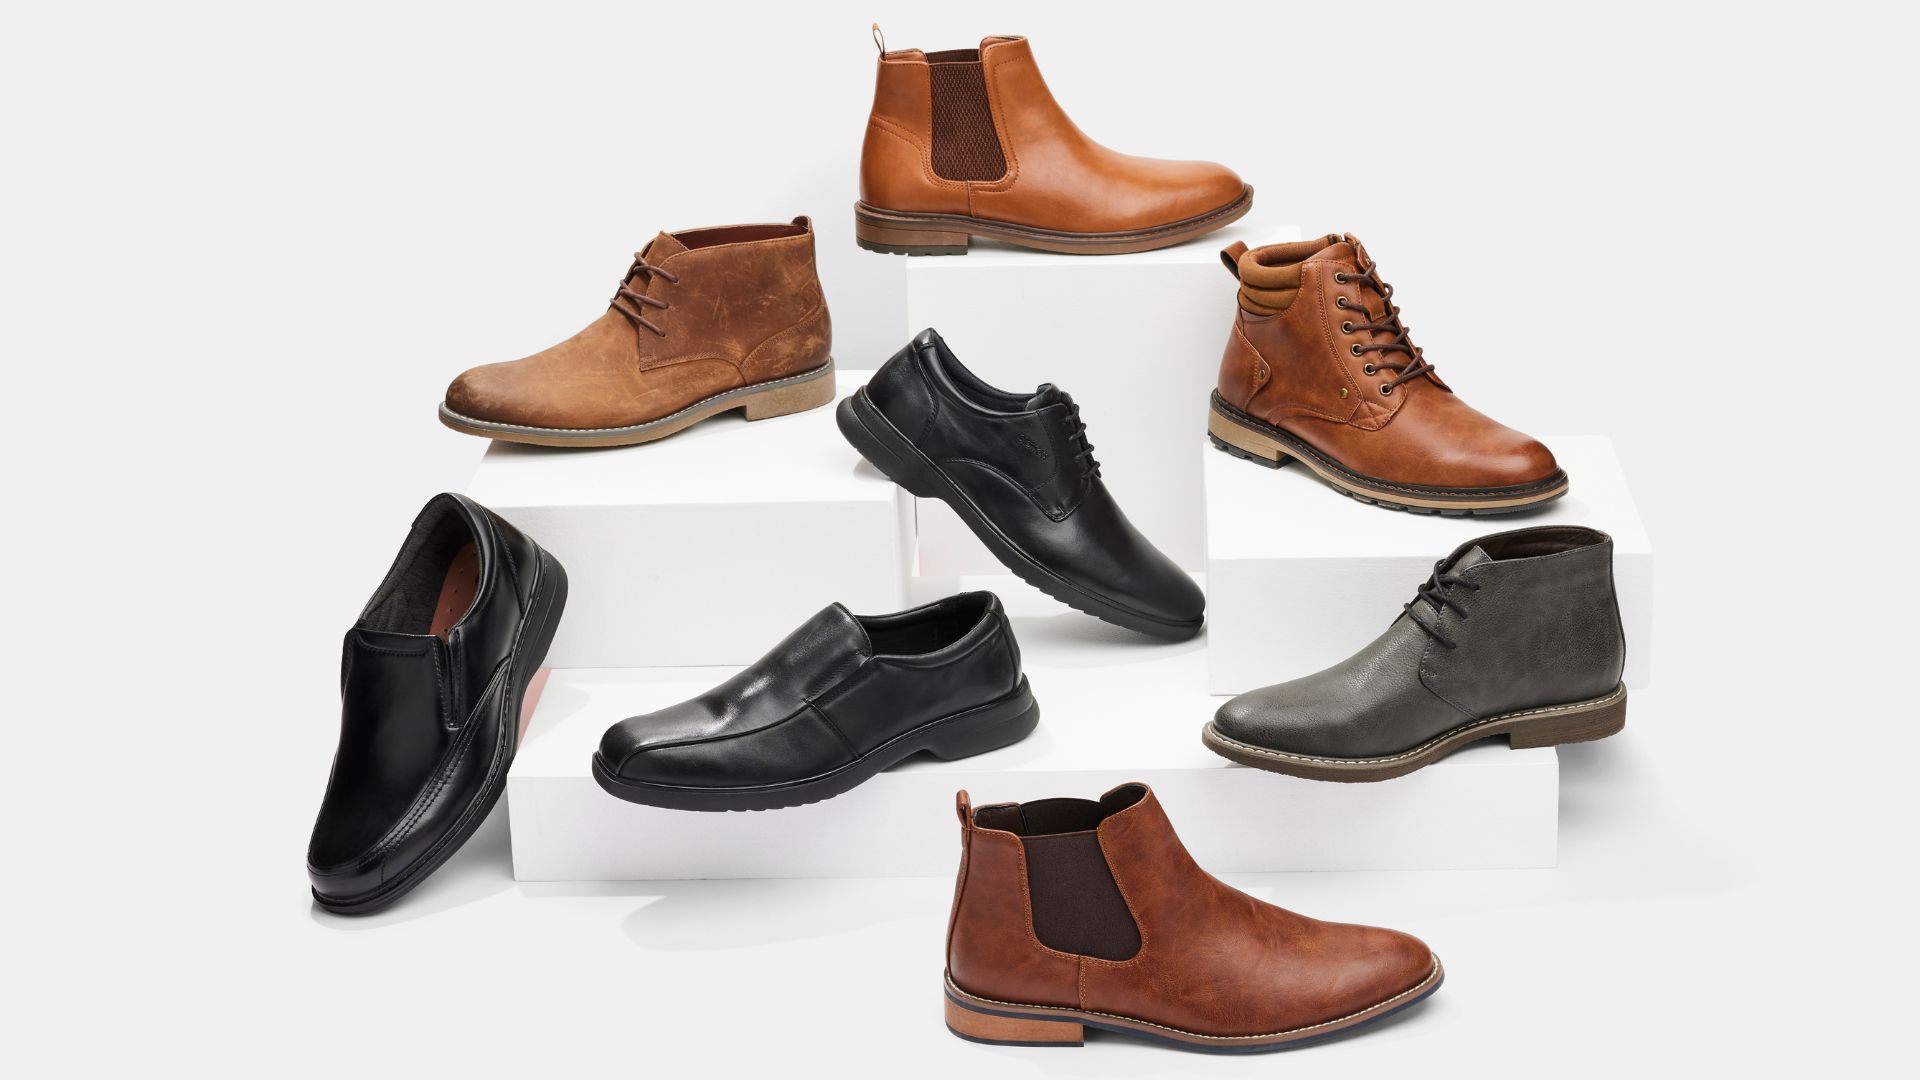 Men's Shoe Styles: The 7 Types of Dress Shoes You Need to Know About